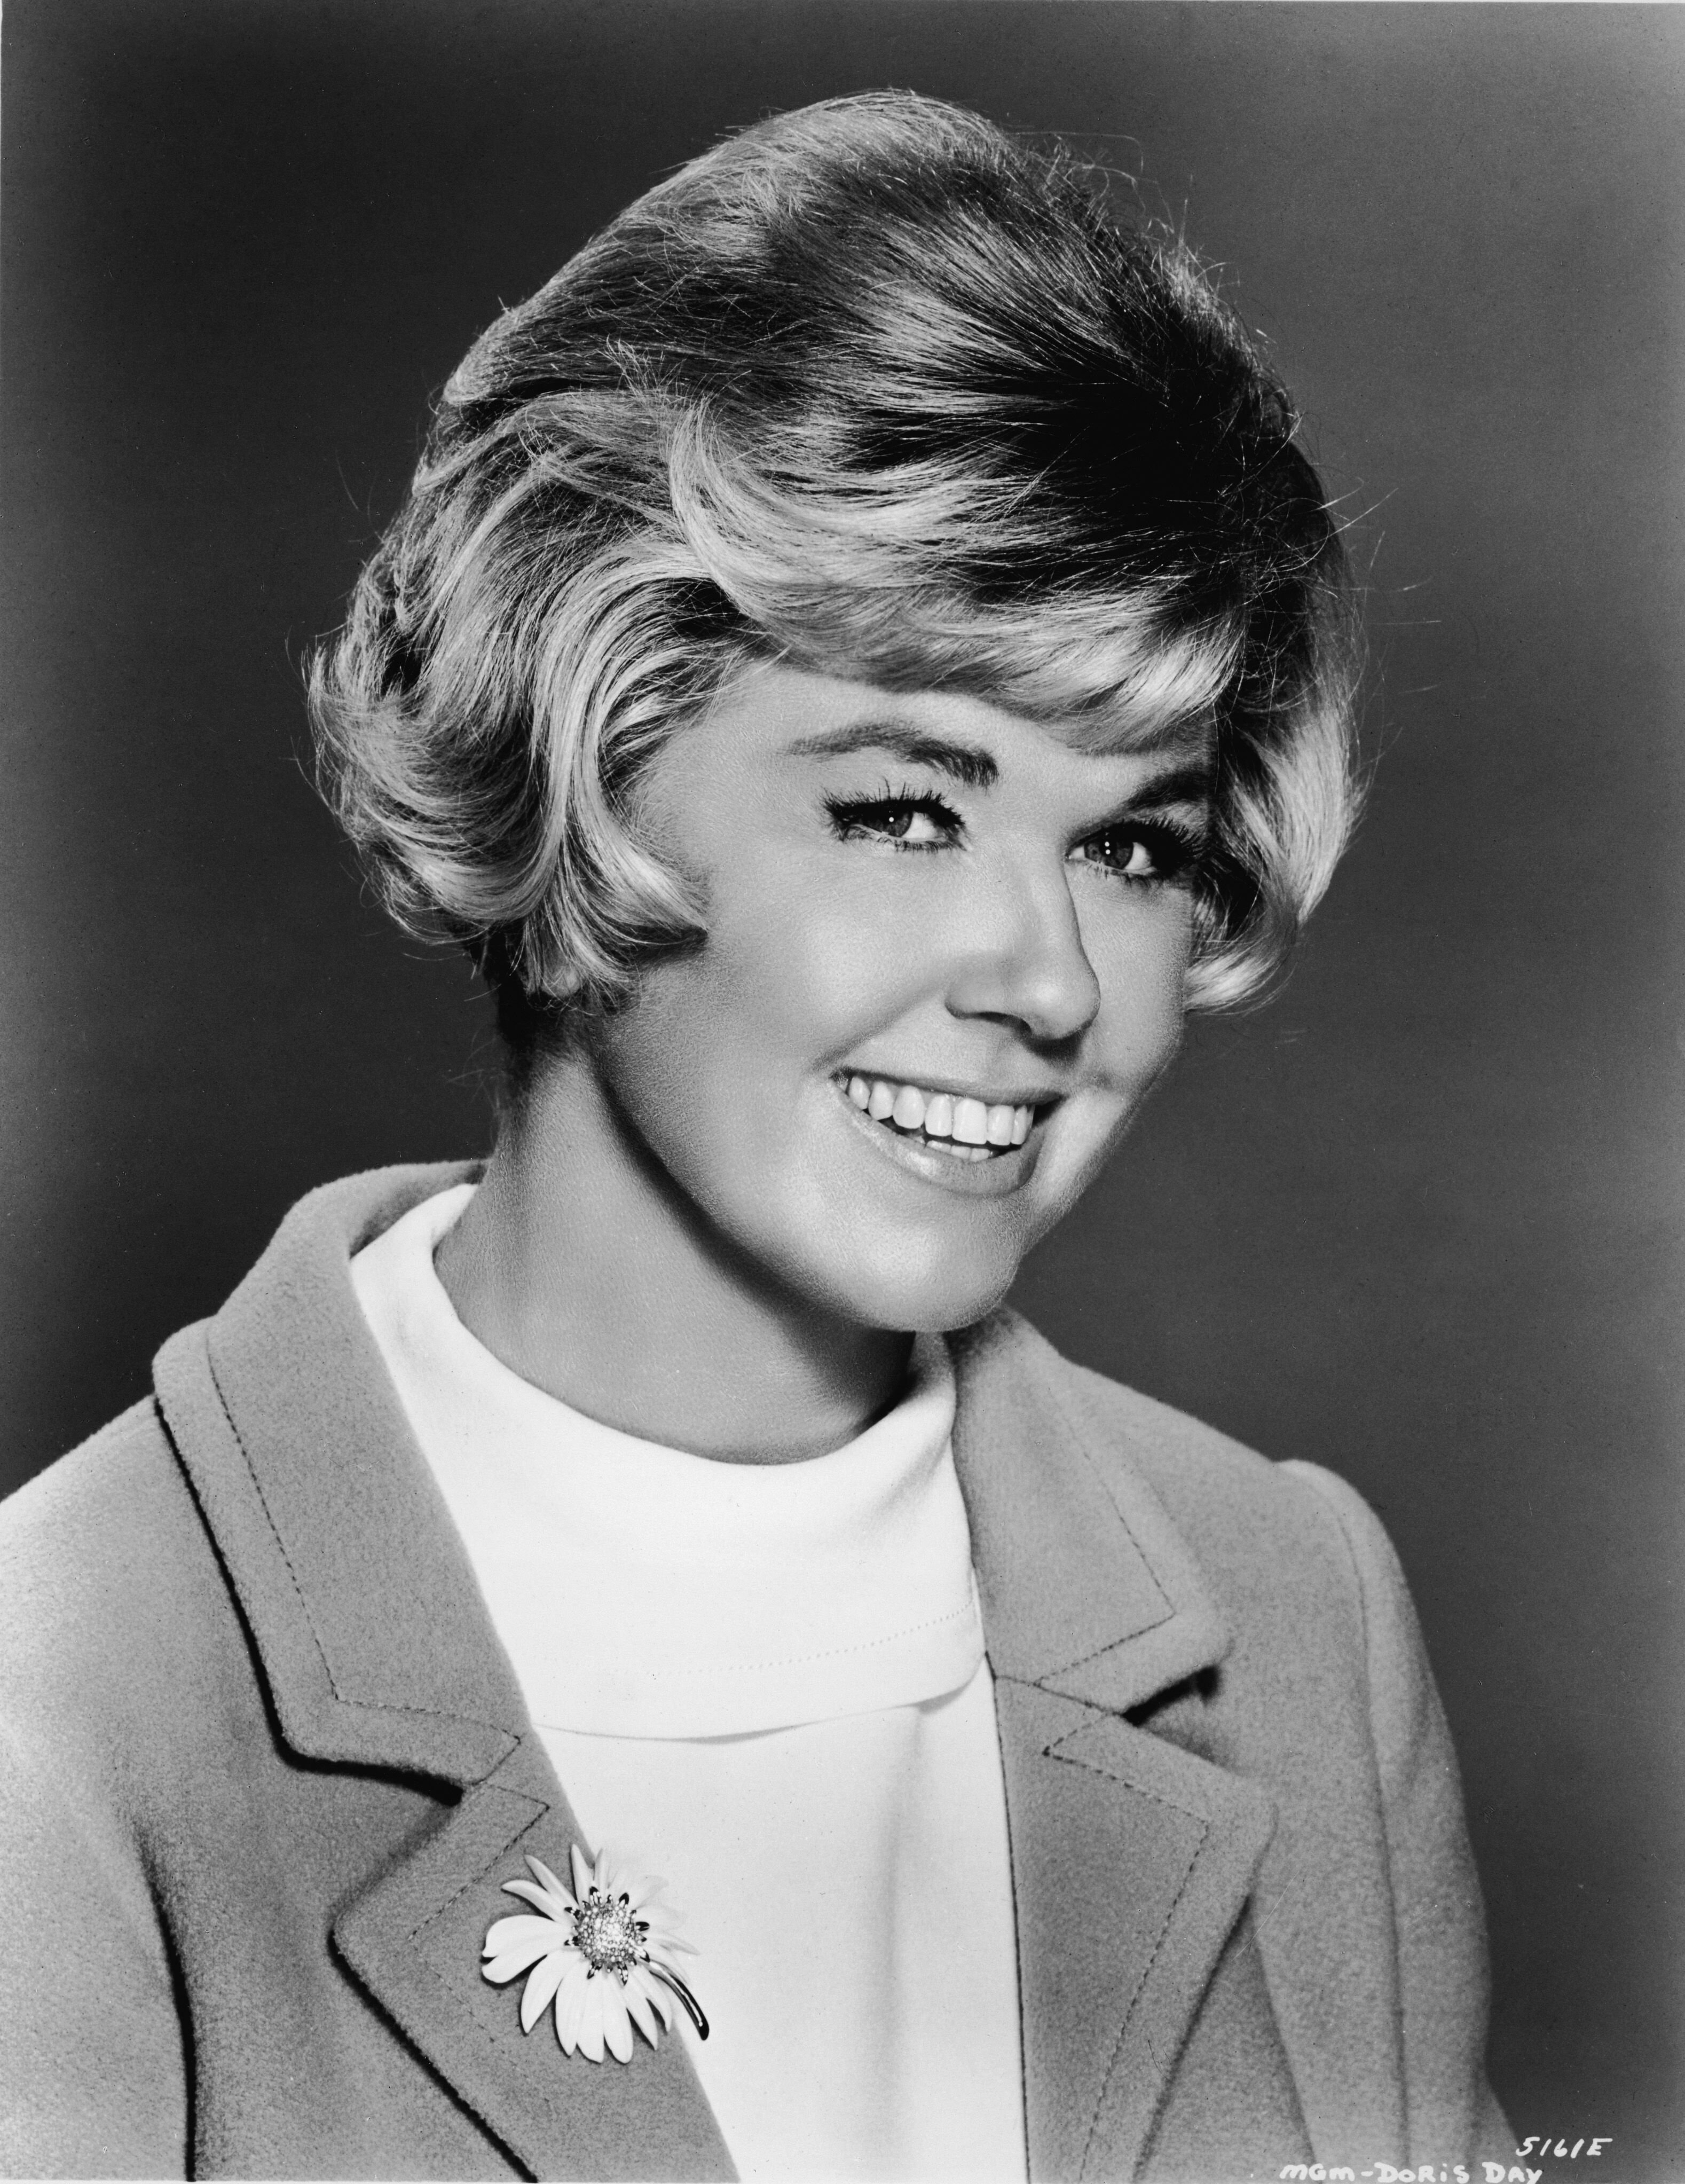 Doris Day in her Younger Years | Source: Getty Images